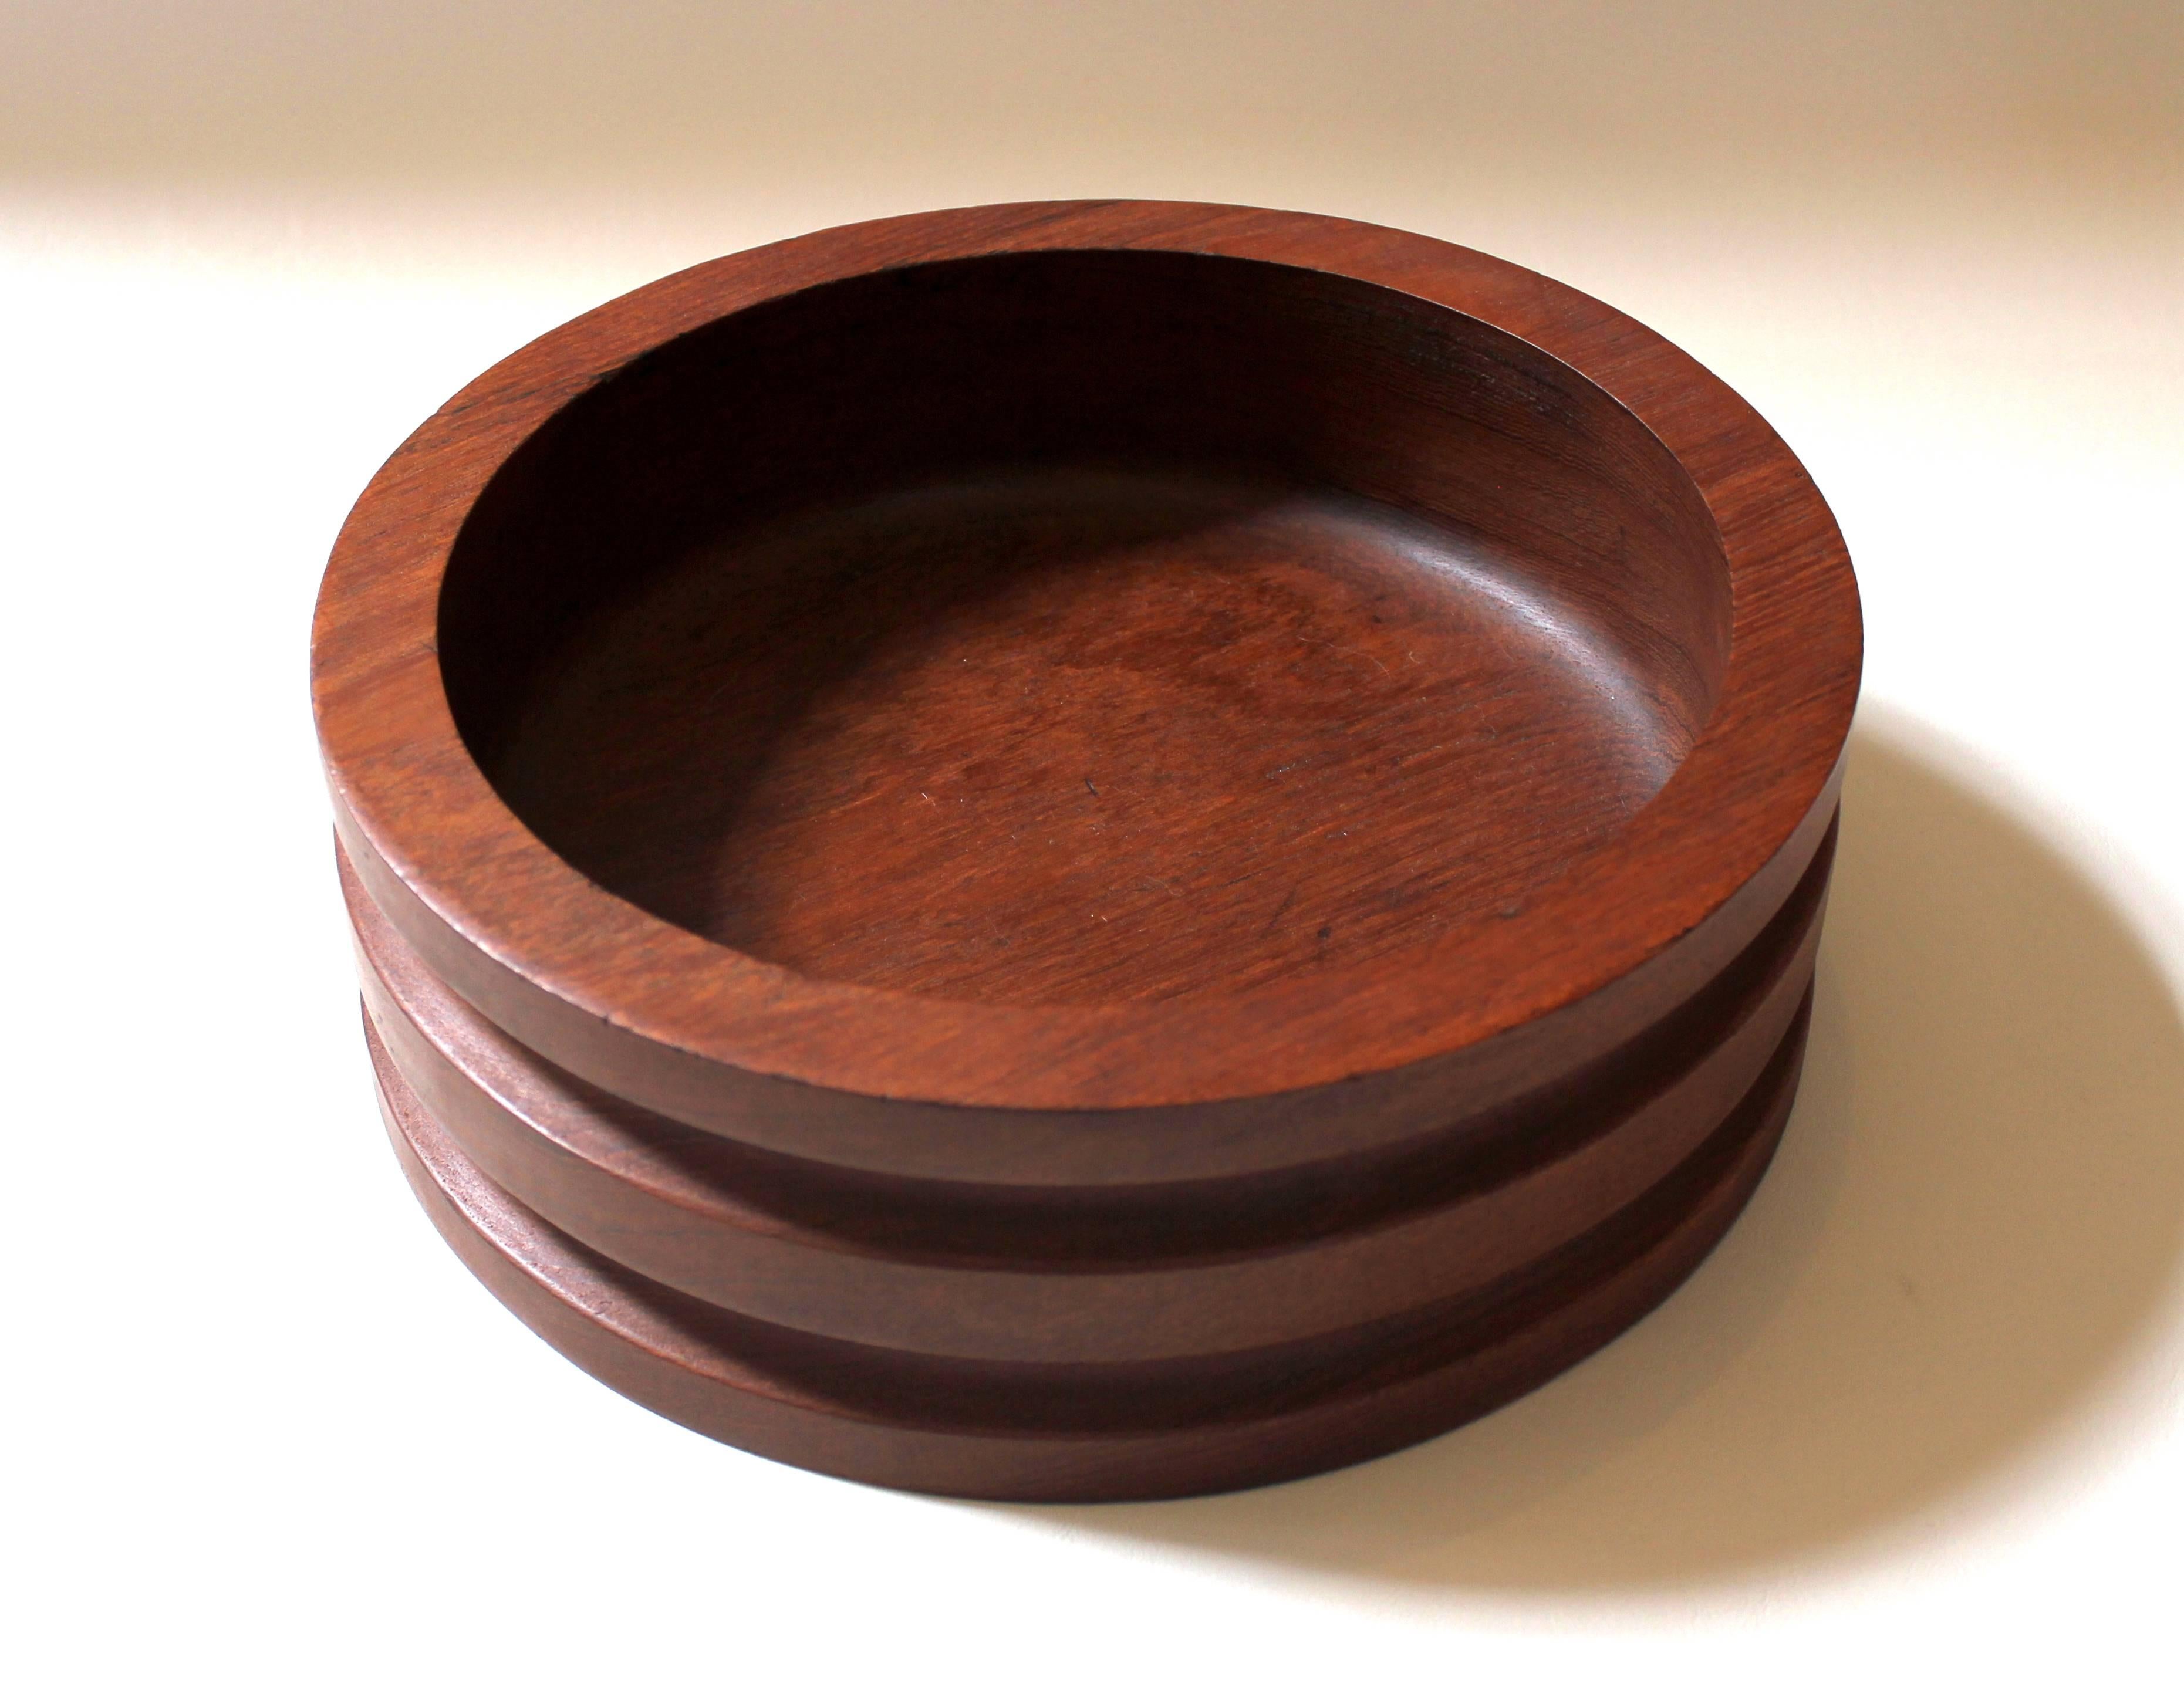 1960s Danish modern teak salad or decorative bowl with ridged sides. A clean and Classic design, evocative of Danish Modern and machine-age styling. In excellent condition with no noticeable wear or damage.